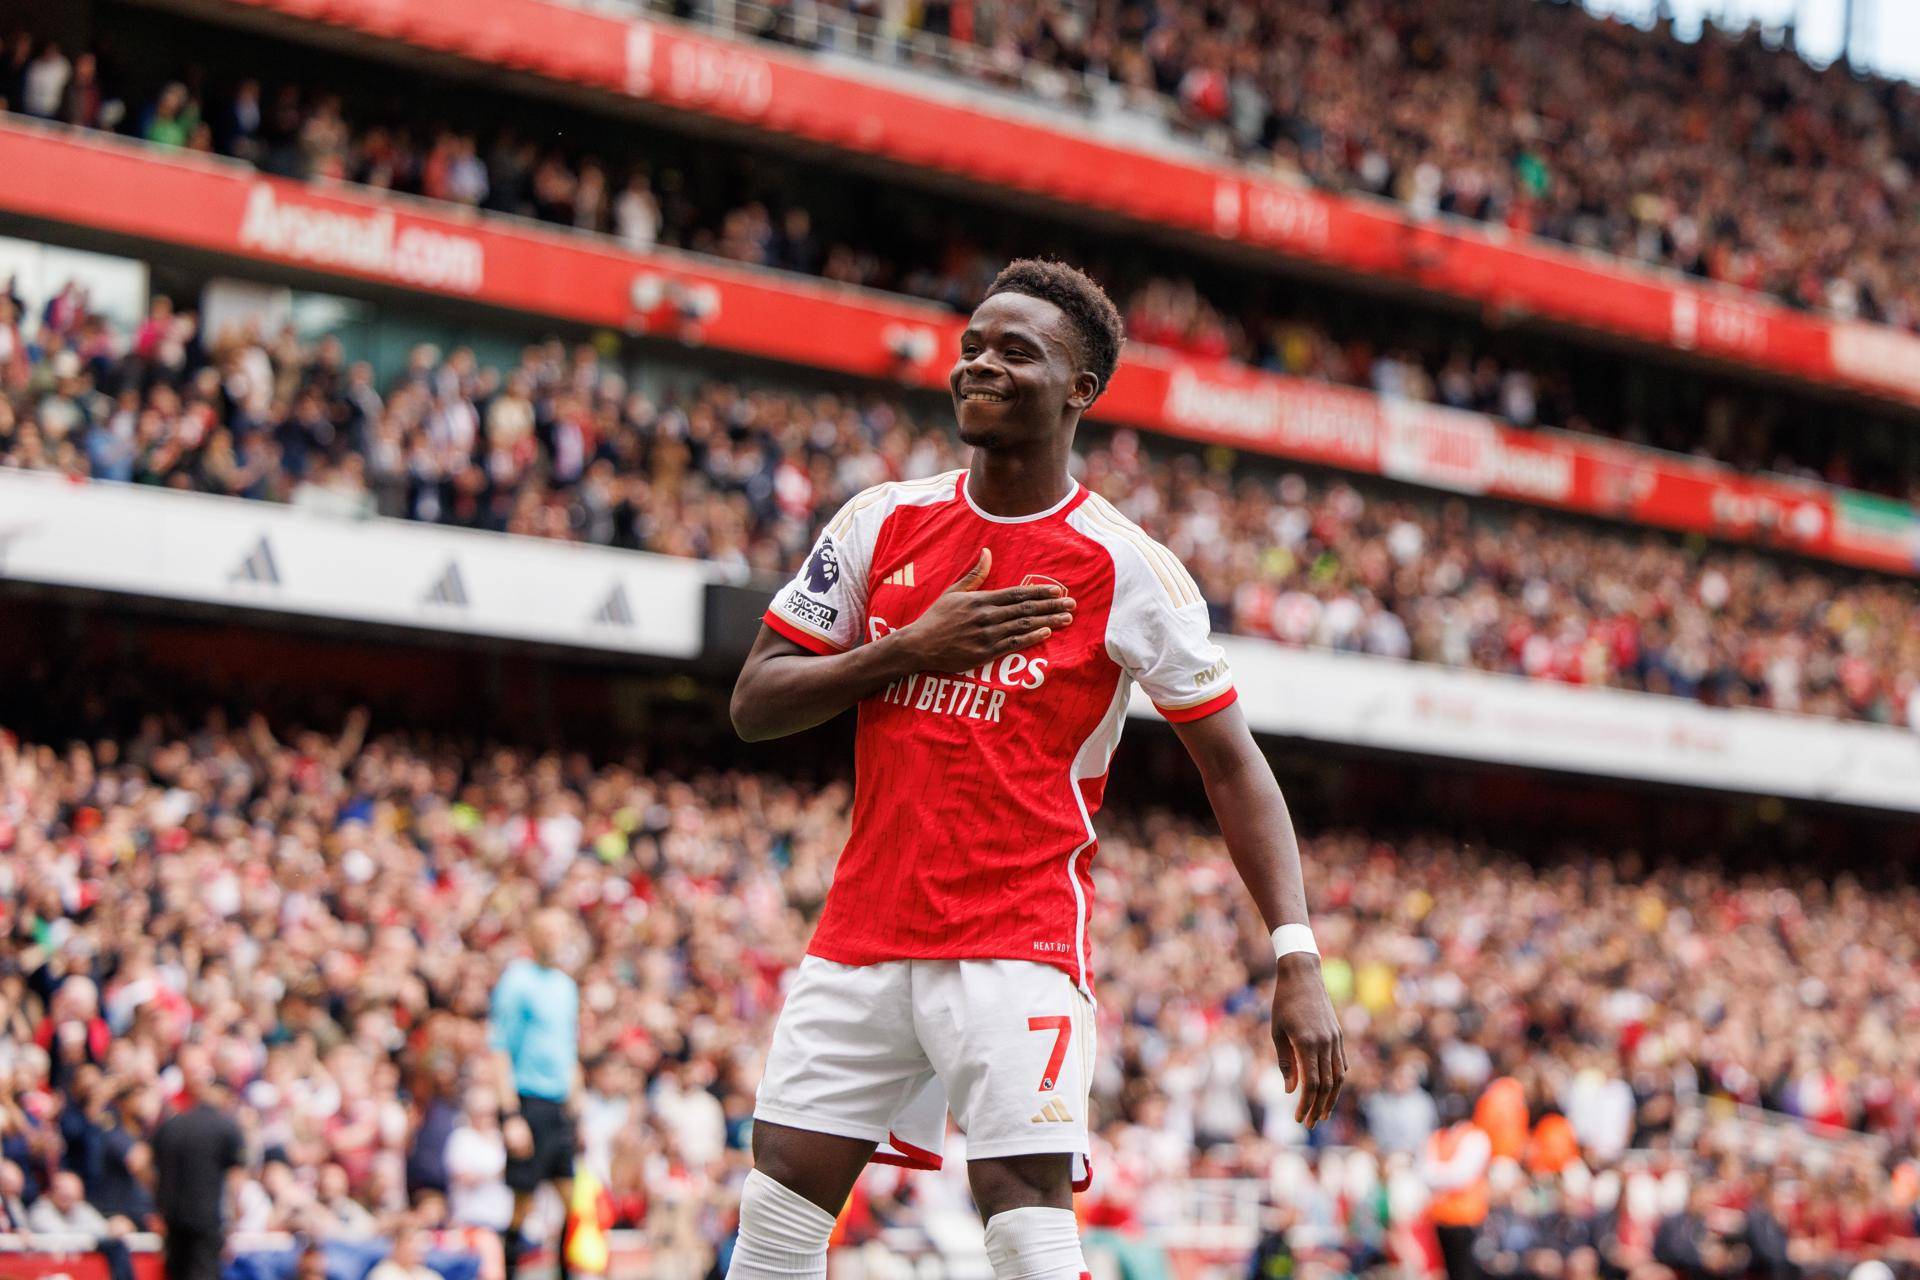 Arsenal's Saka ready for 'beautiful challenge' to overtake Man City in title race